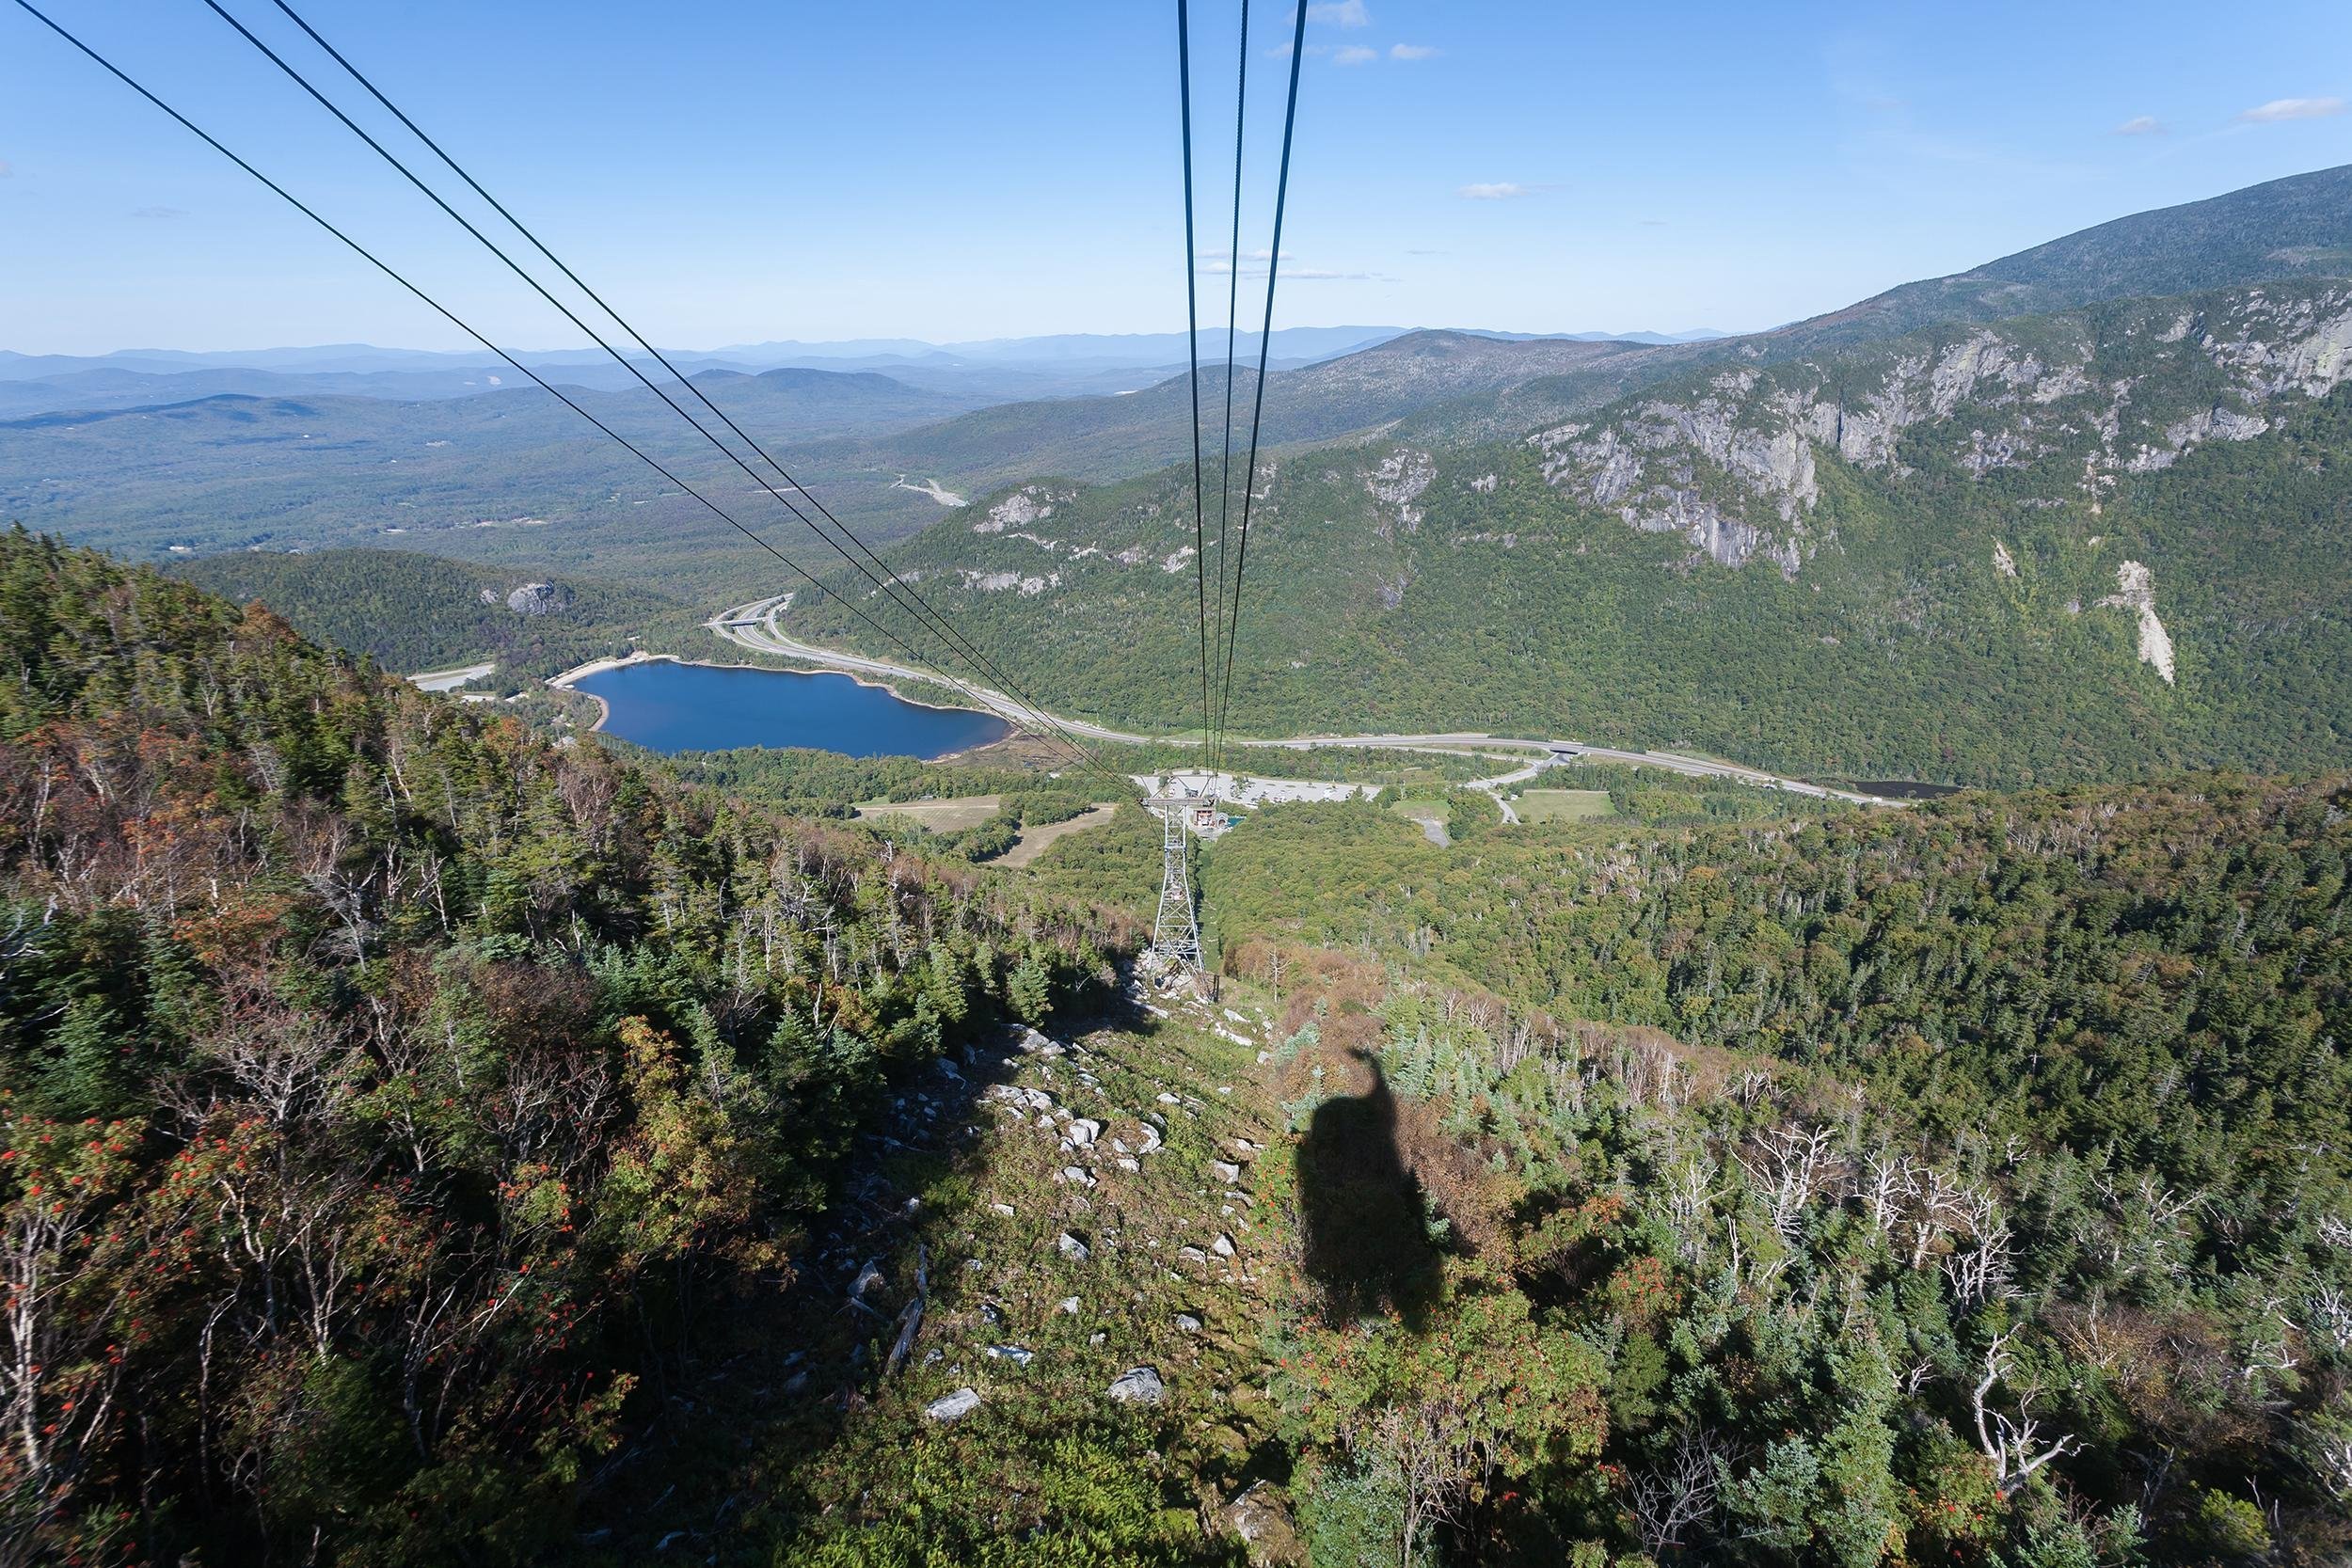 <p>In New Hampshire, hop on the Cannon Mountain Aerial Tramway to ride more than 4,000 feet up and take selfies along the way. Or wait till you reach the mountaintop, where the views extend to four states and Canada.</p>